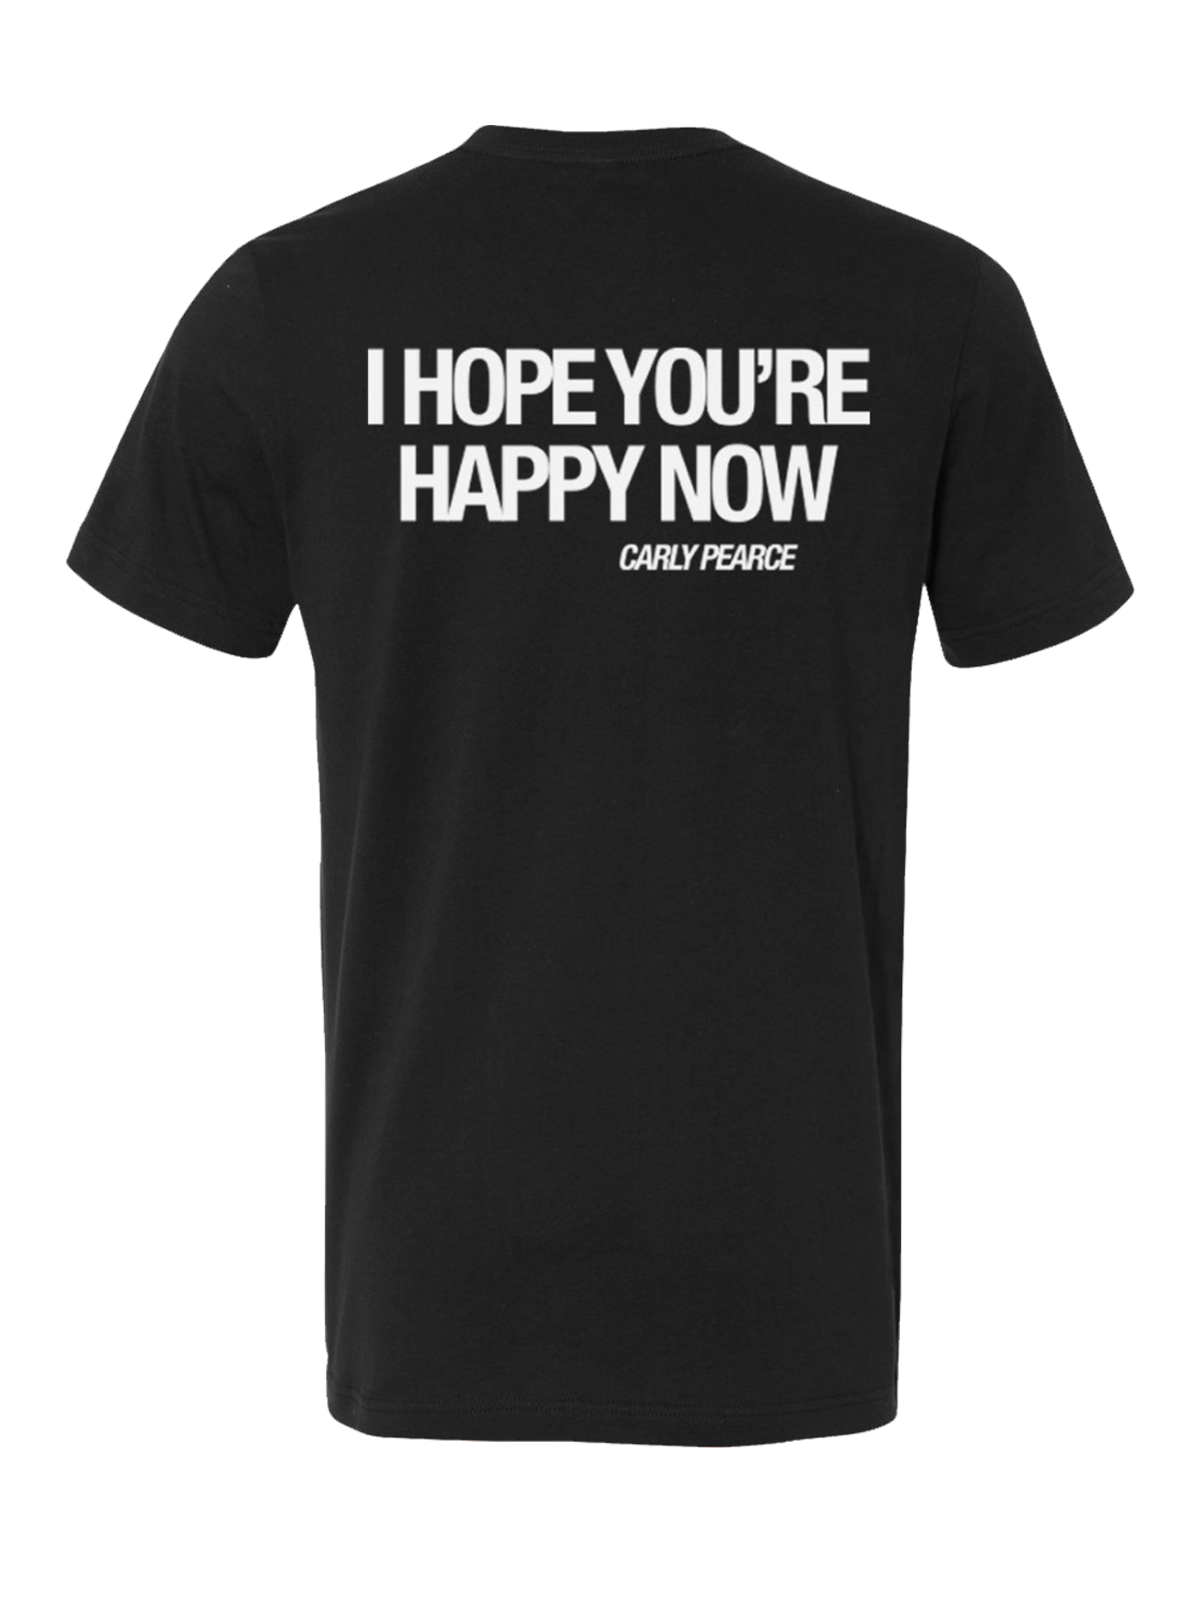 I hope you're happy now black tee back Carly Pearce